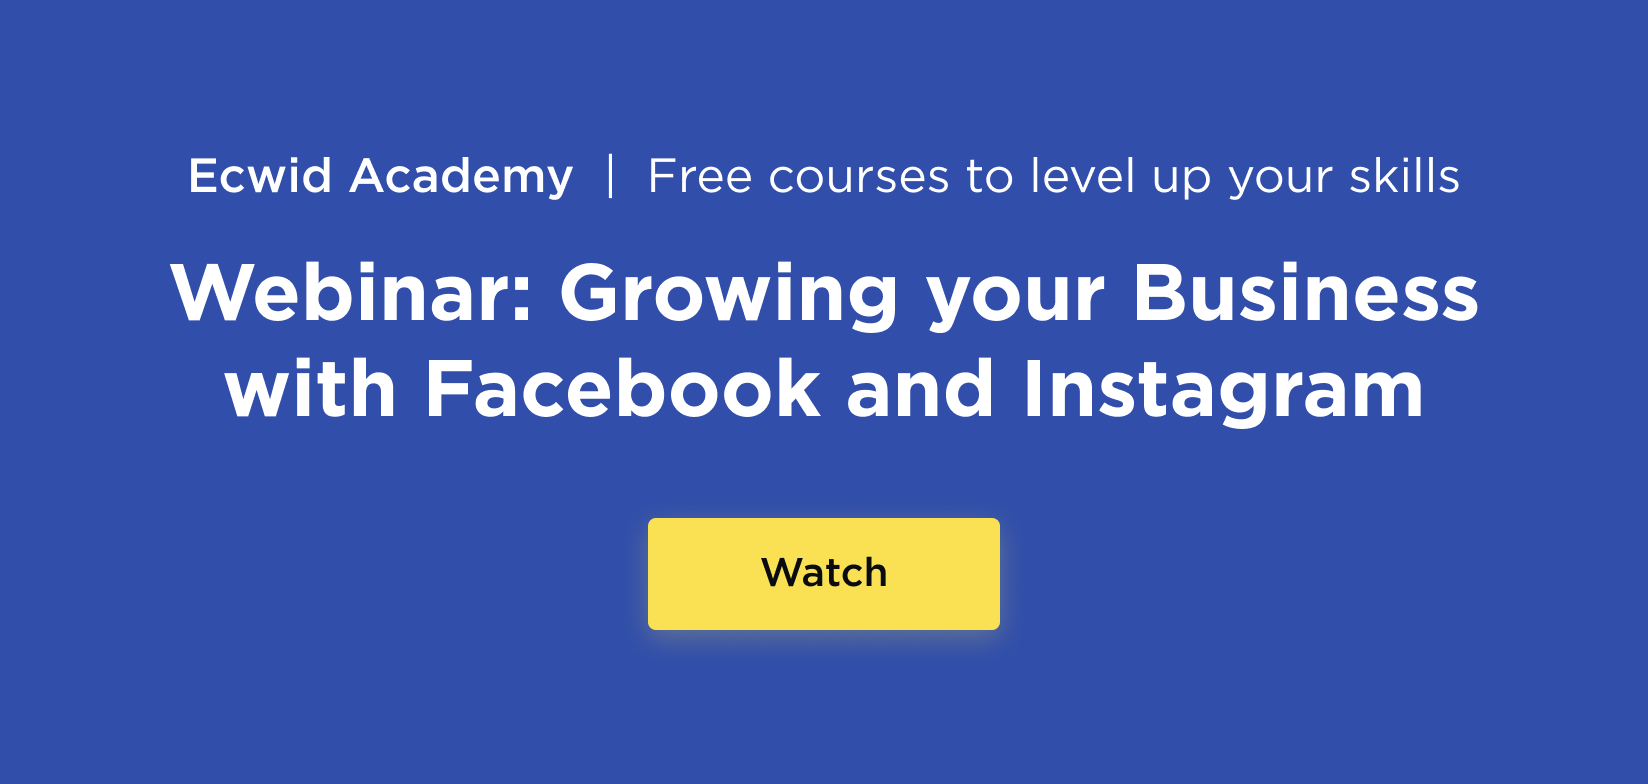 Webinar__Growing_your_Business_with_Facebook_and_Instagram.png